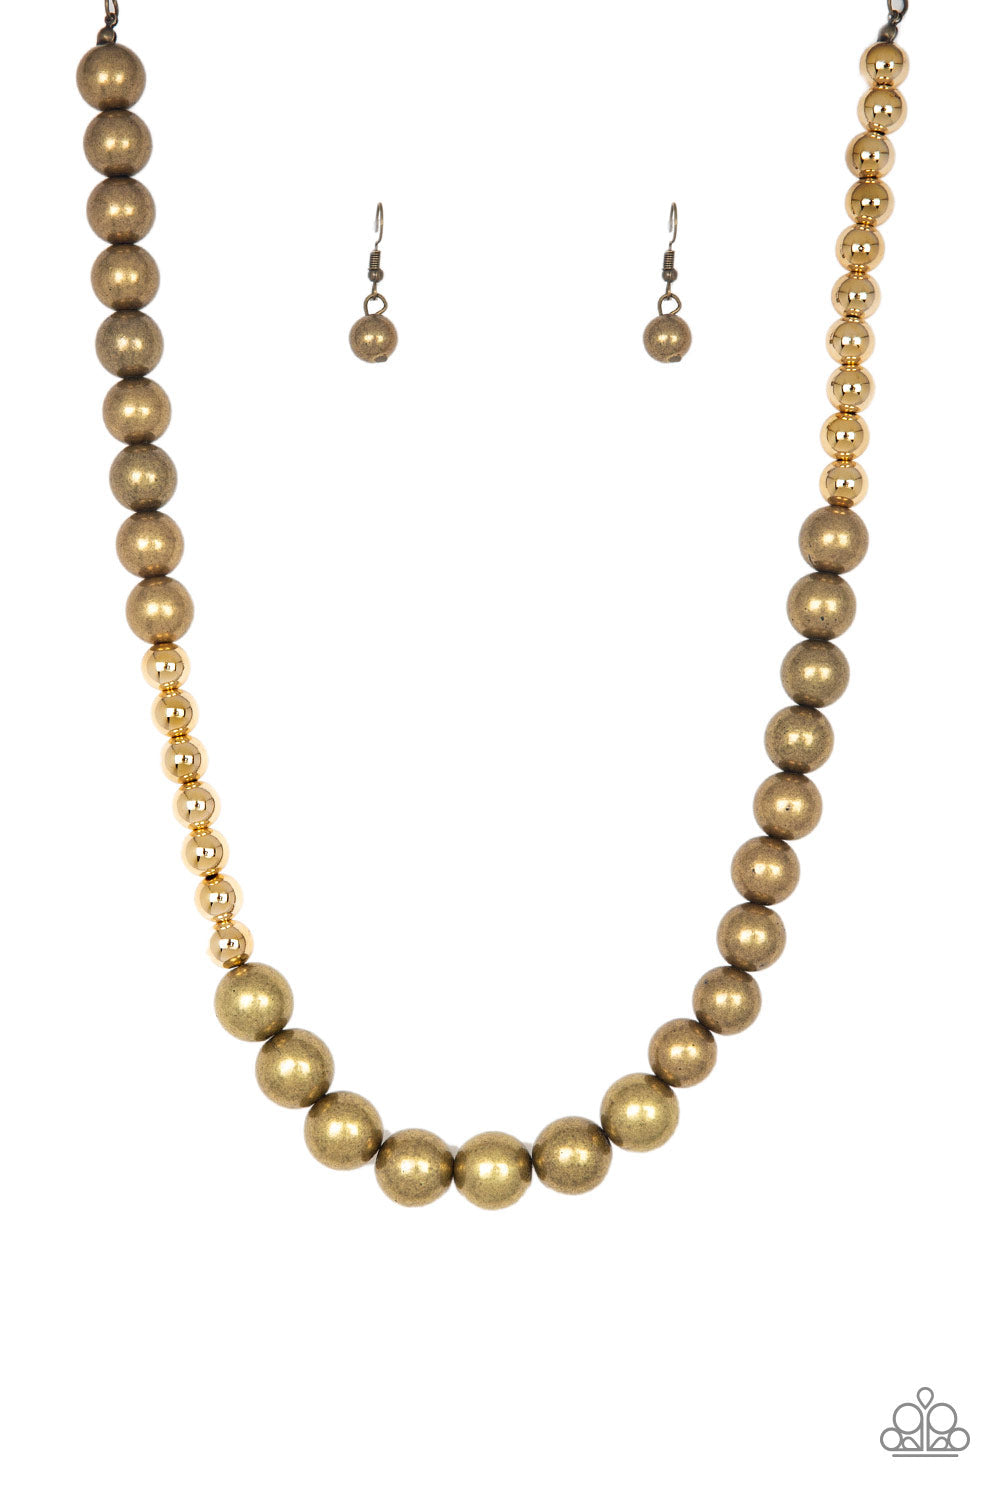 Power To The People - Brass and Gold Necklace - Paparazzi Accessories - Glistening gold and antiqued brass beads drape below the collar in a dramatically asymmetrical fashion. Features an adjustable clasp closure. Sold as one individual necklace.